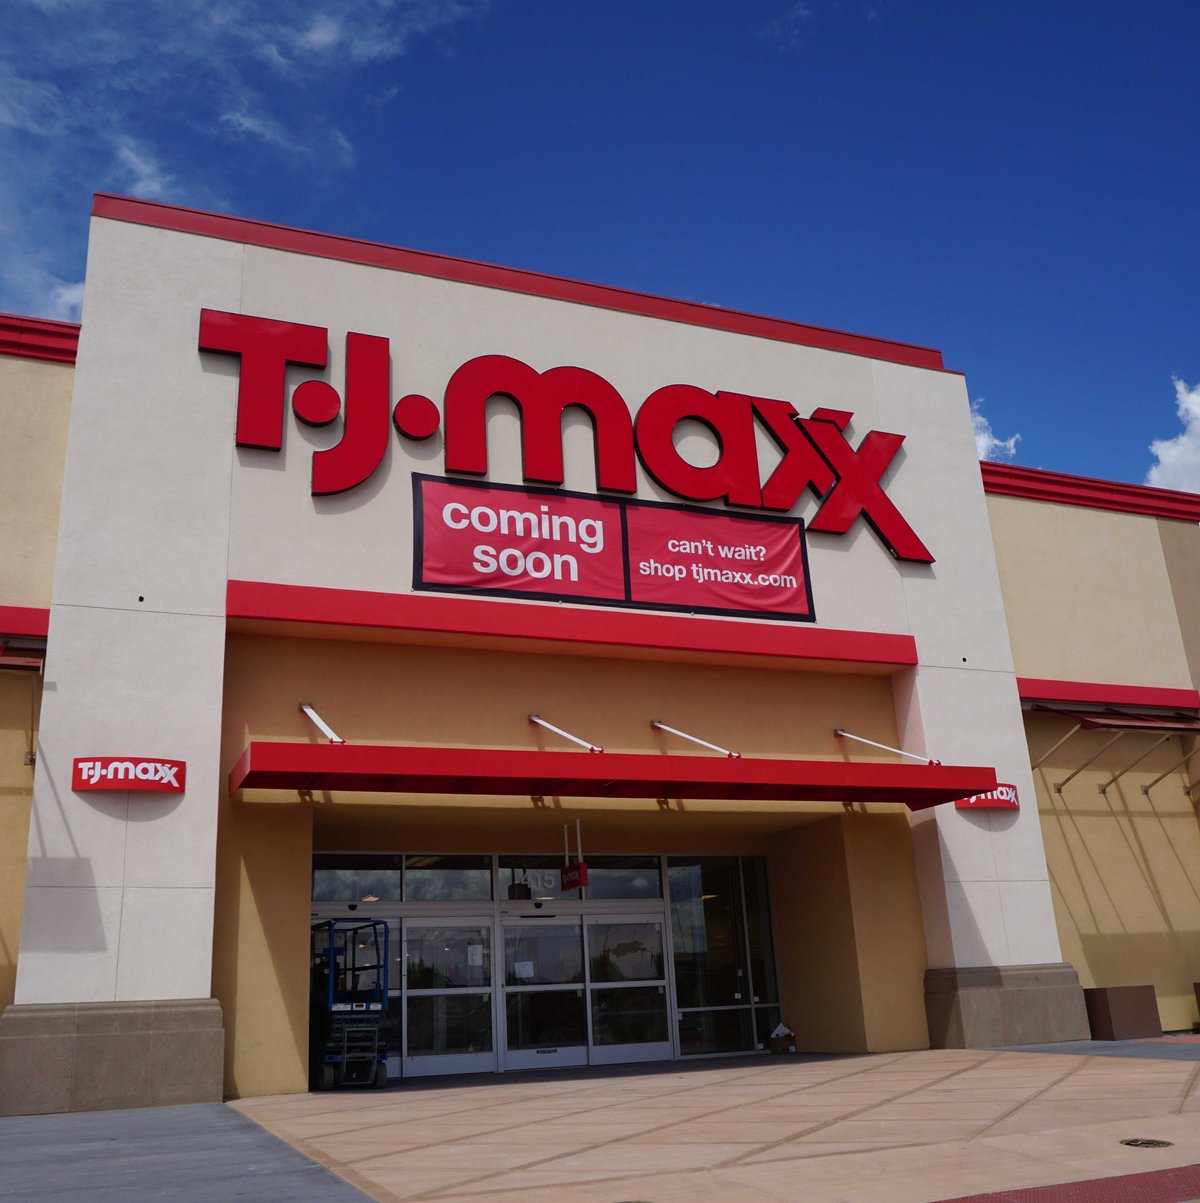 T.J. Maxx at Southridge to open in August - Milwaukee Business Journal